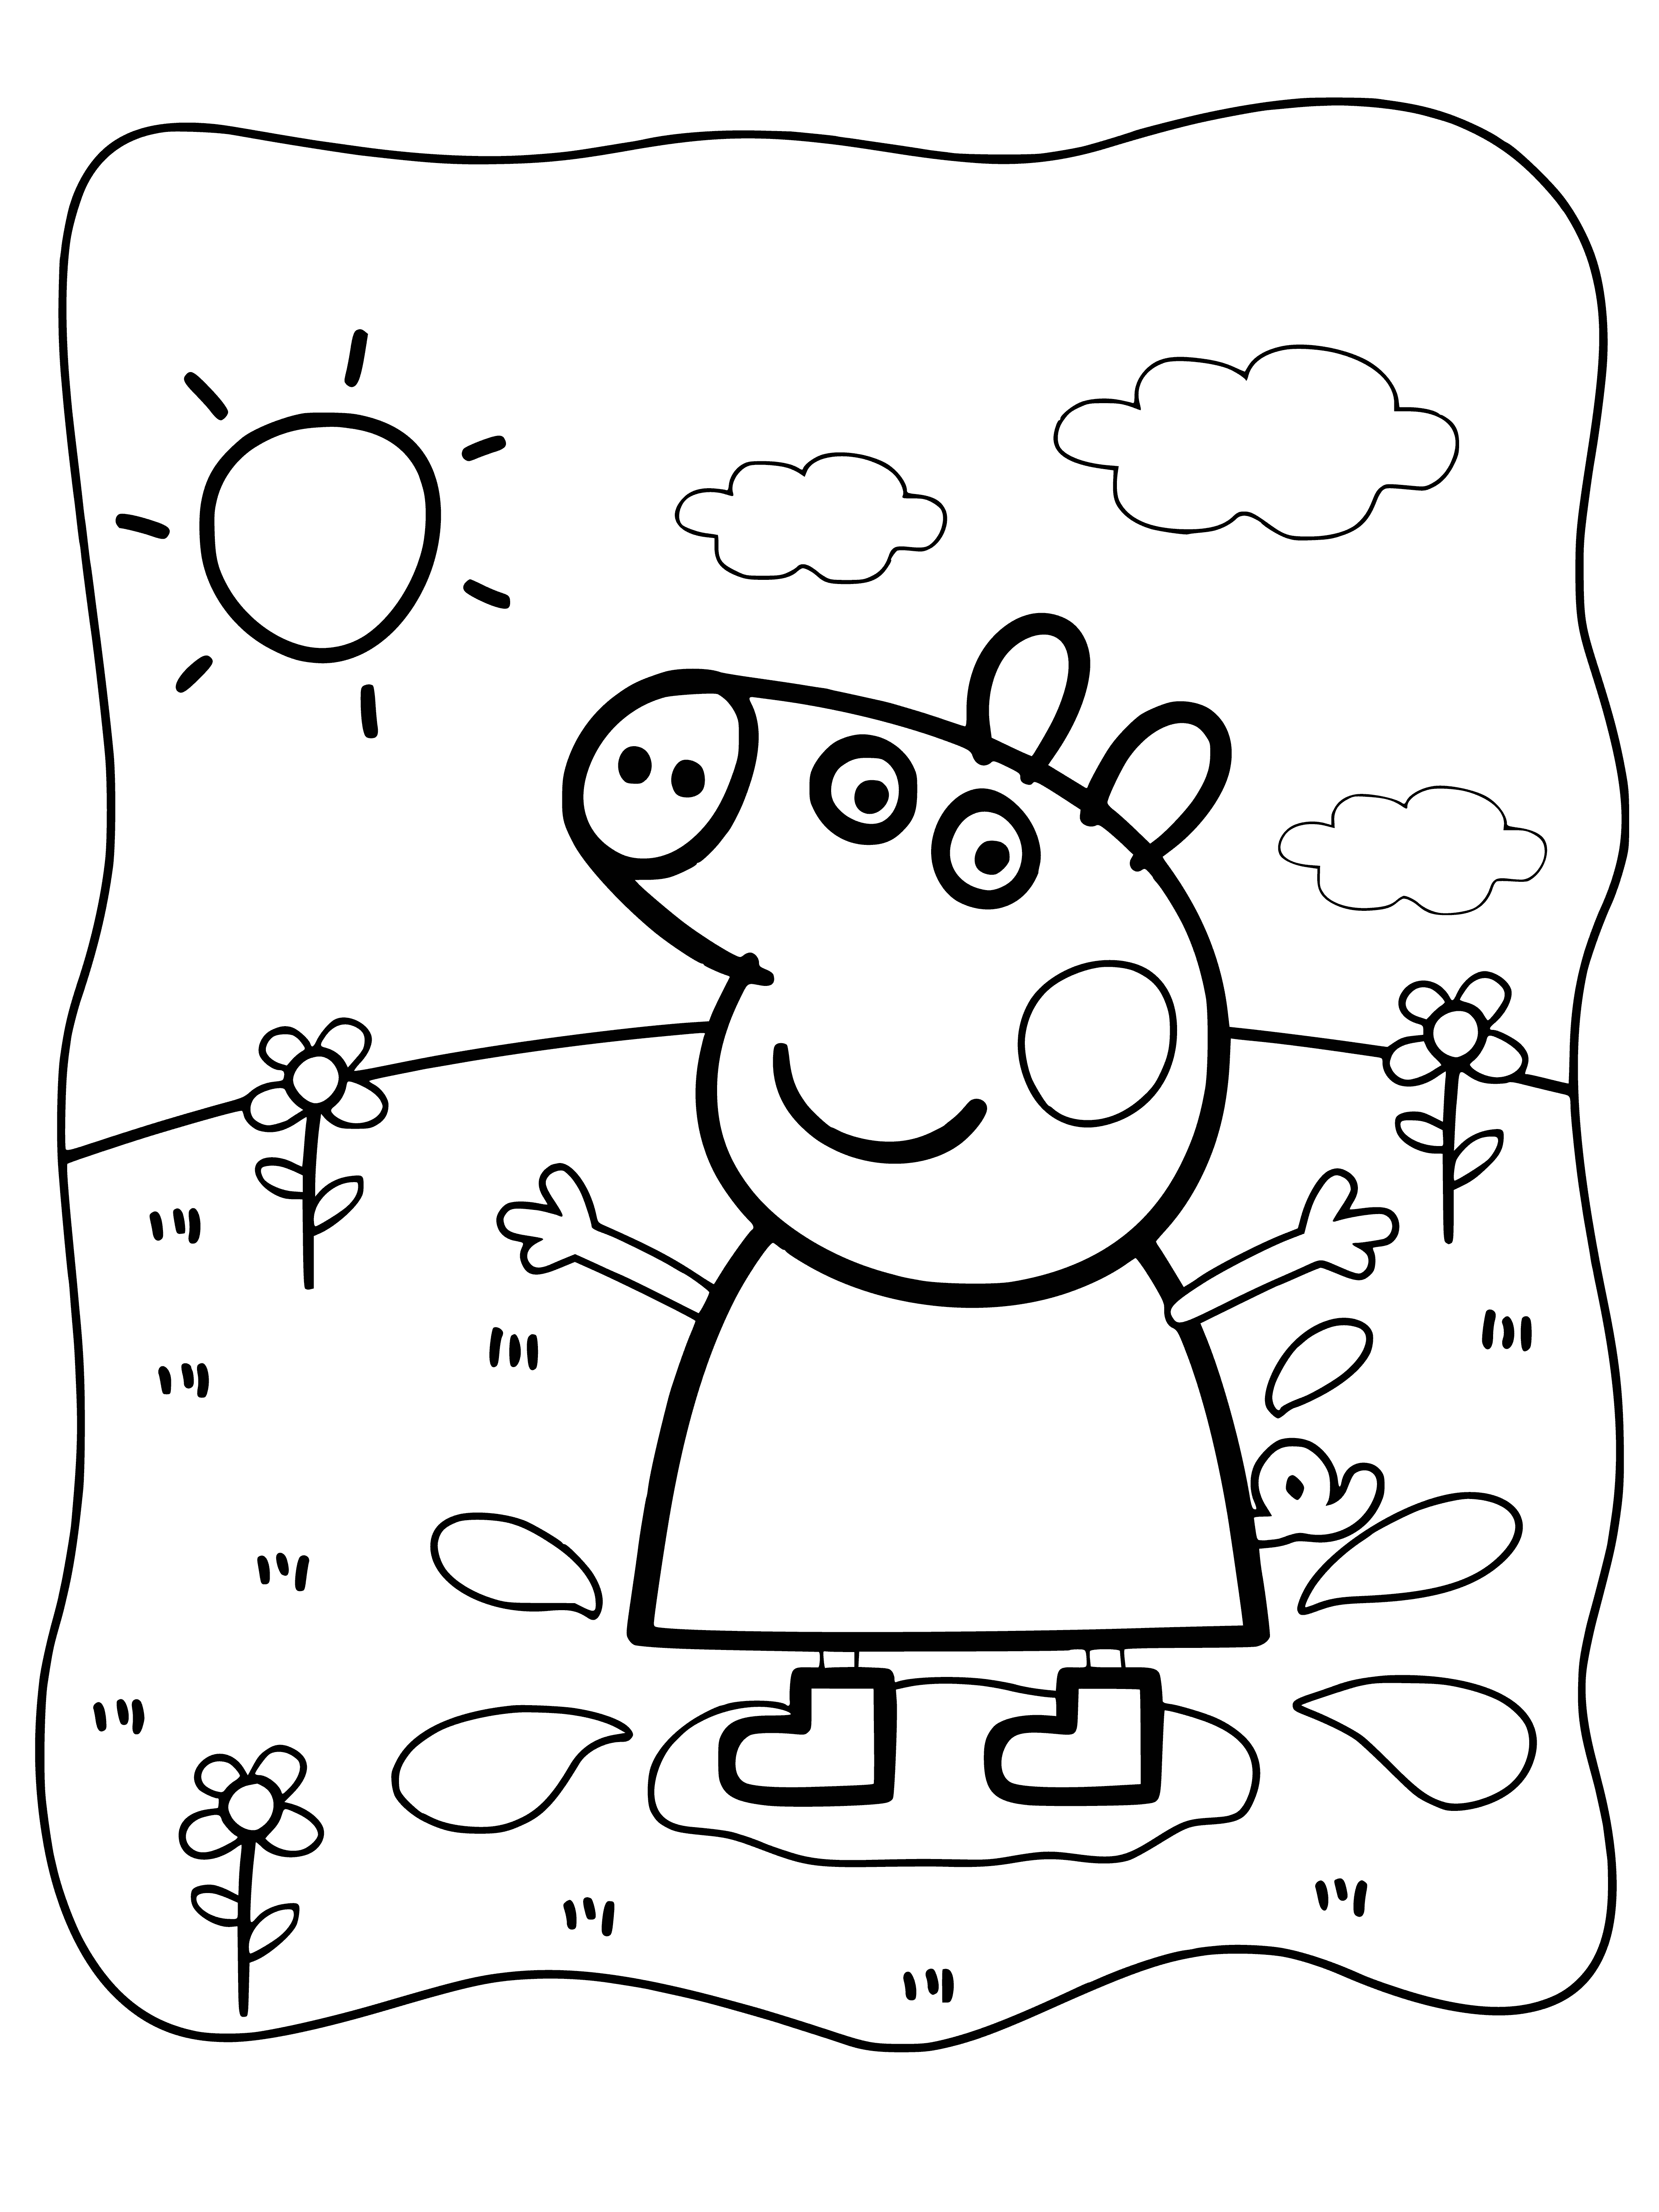 coloring page: Peppa Pig is splashing in a puddle and having a great time! #ColoringFun